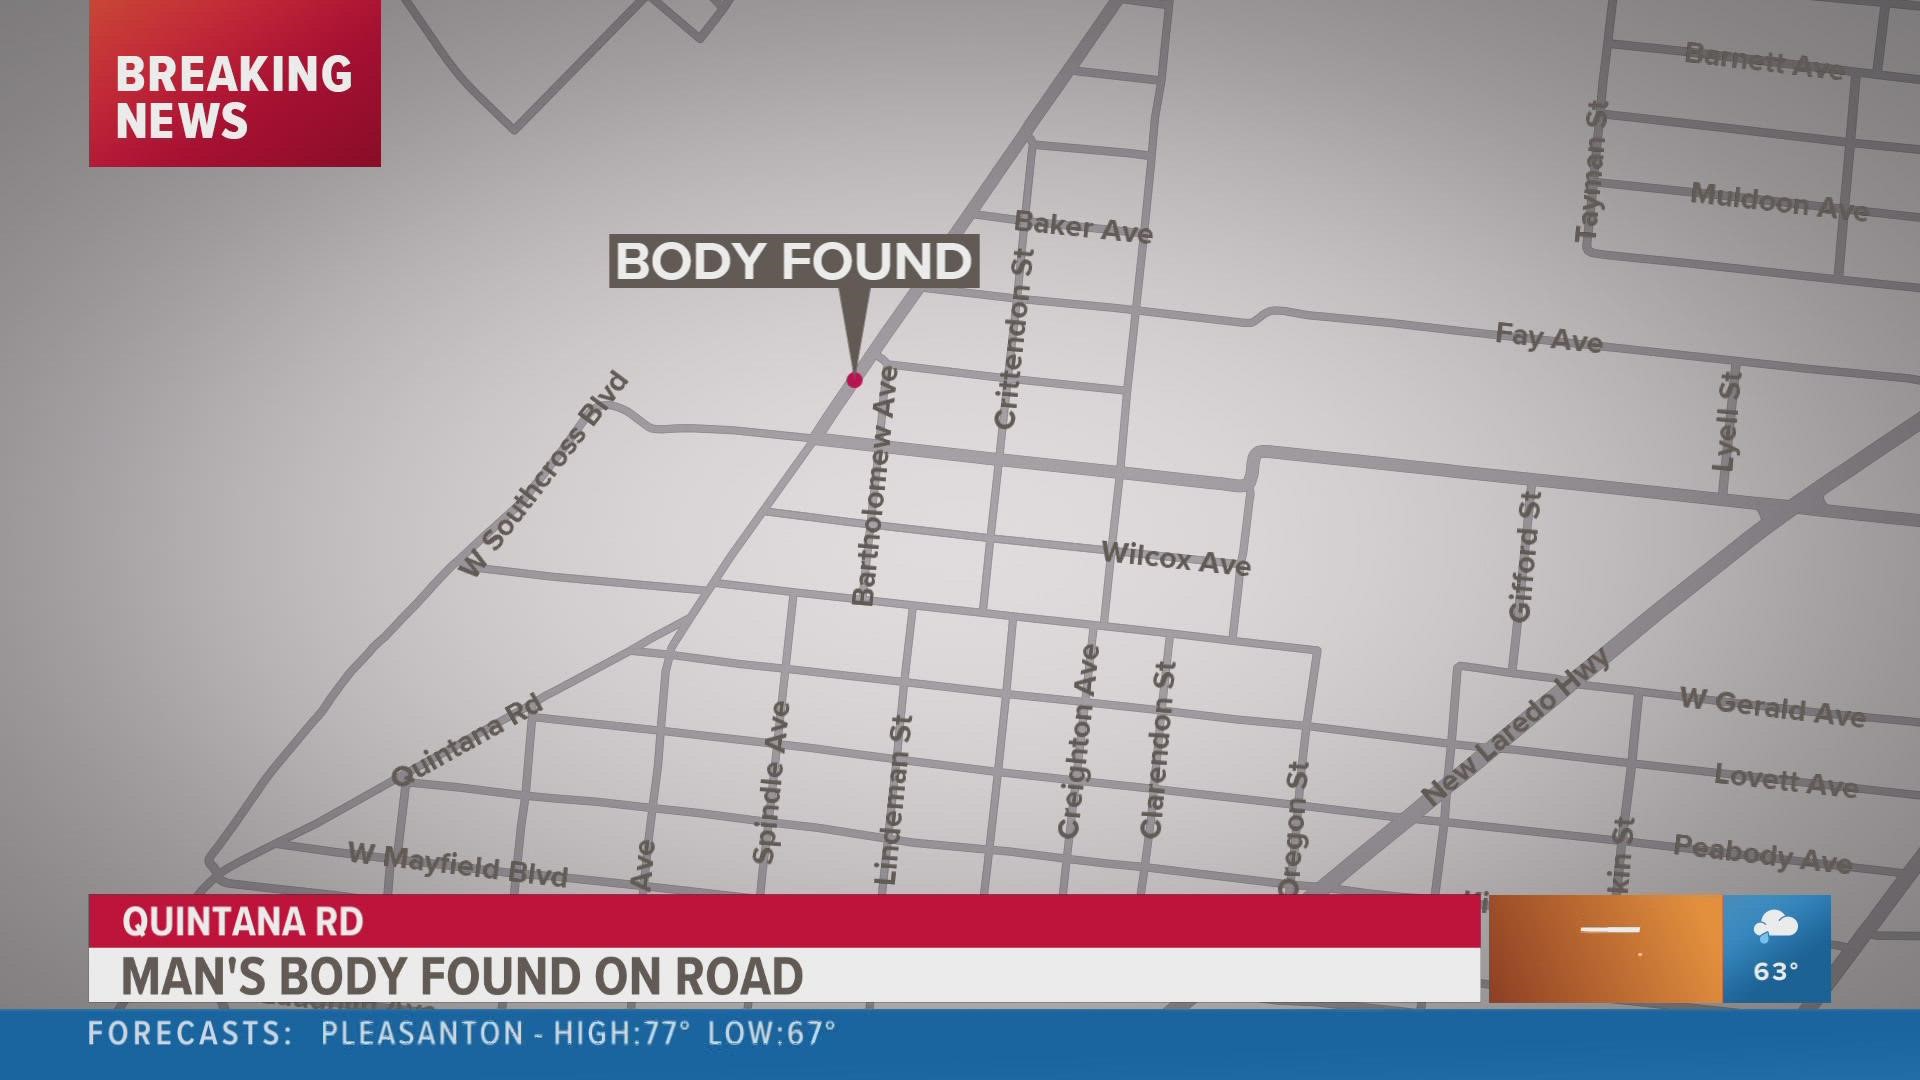 Officials are now investigating after a man's body was found on the side of the road.